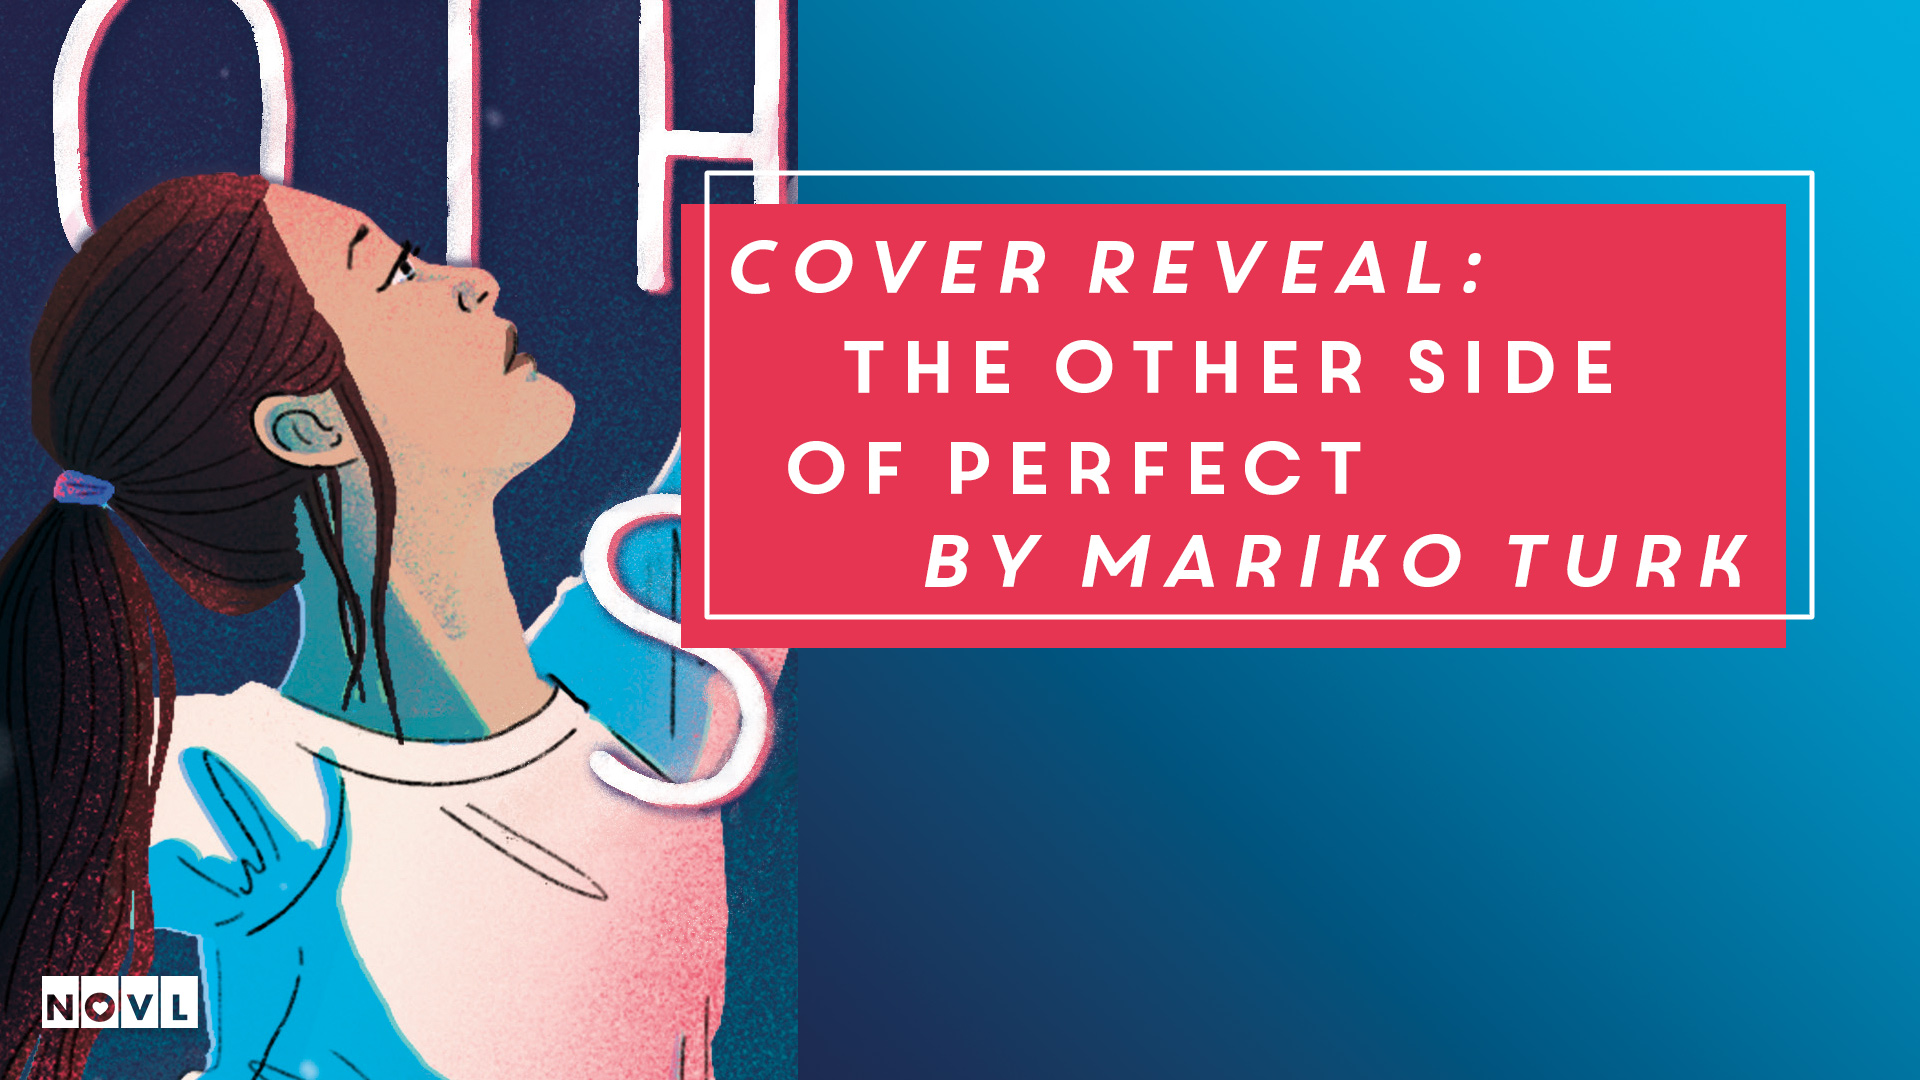 The NOVL Blog, Featured Image for Article: Cover Reveal: The Other Side of Perfect